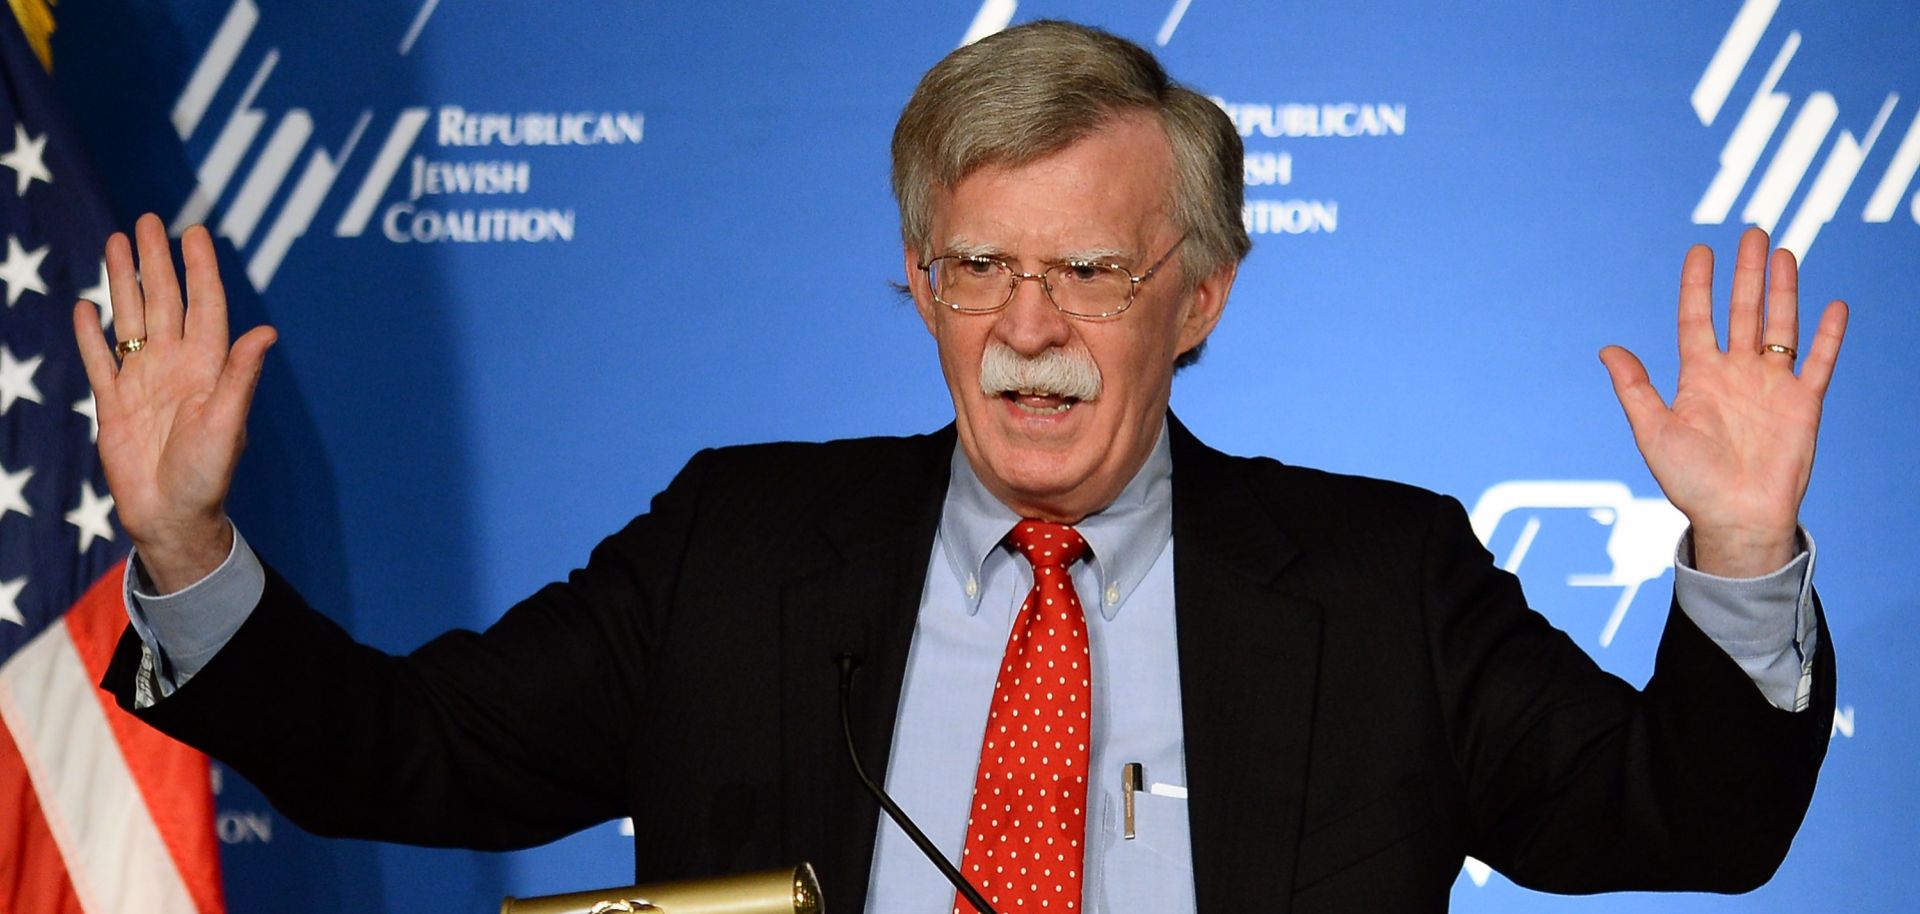 Former U.S. Ambassador to the United Nations John Bolton will become U.S. President Donald Trump's new national security adviser starting April 9.